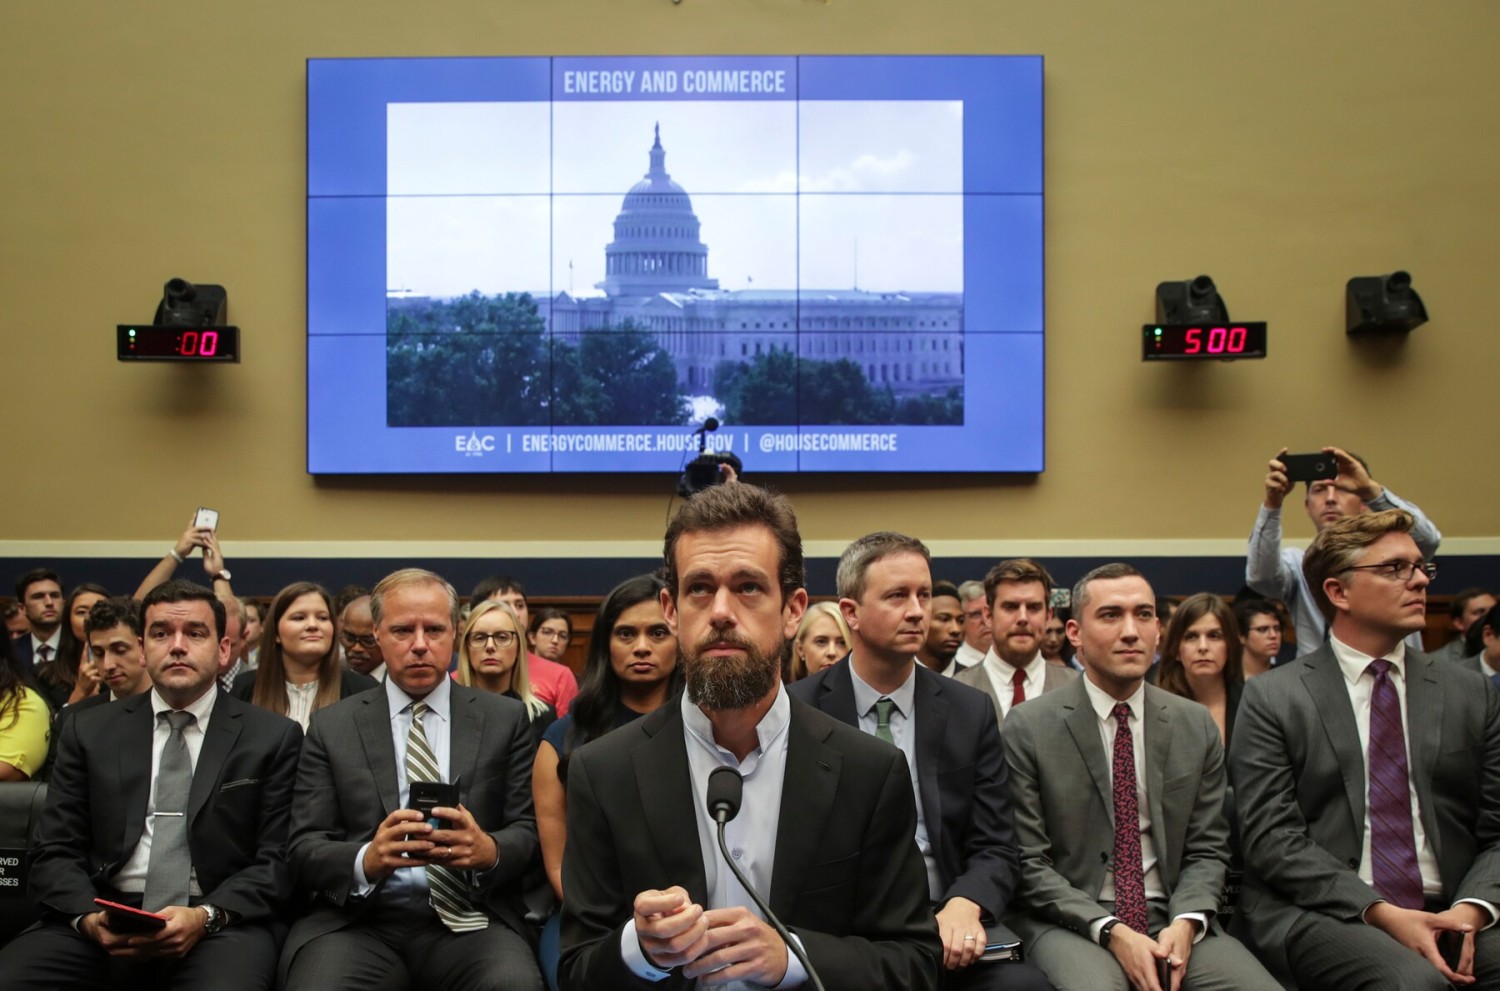 Twitter's Dorsey testifies in a House hearing about transparency and accountability in 2018. (Drew Angerer/Getty Images)